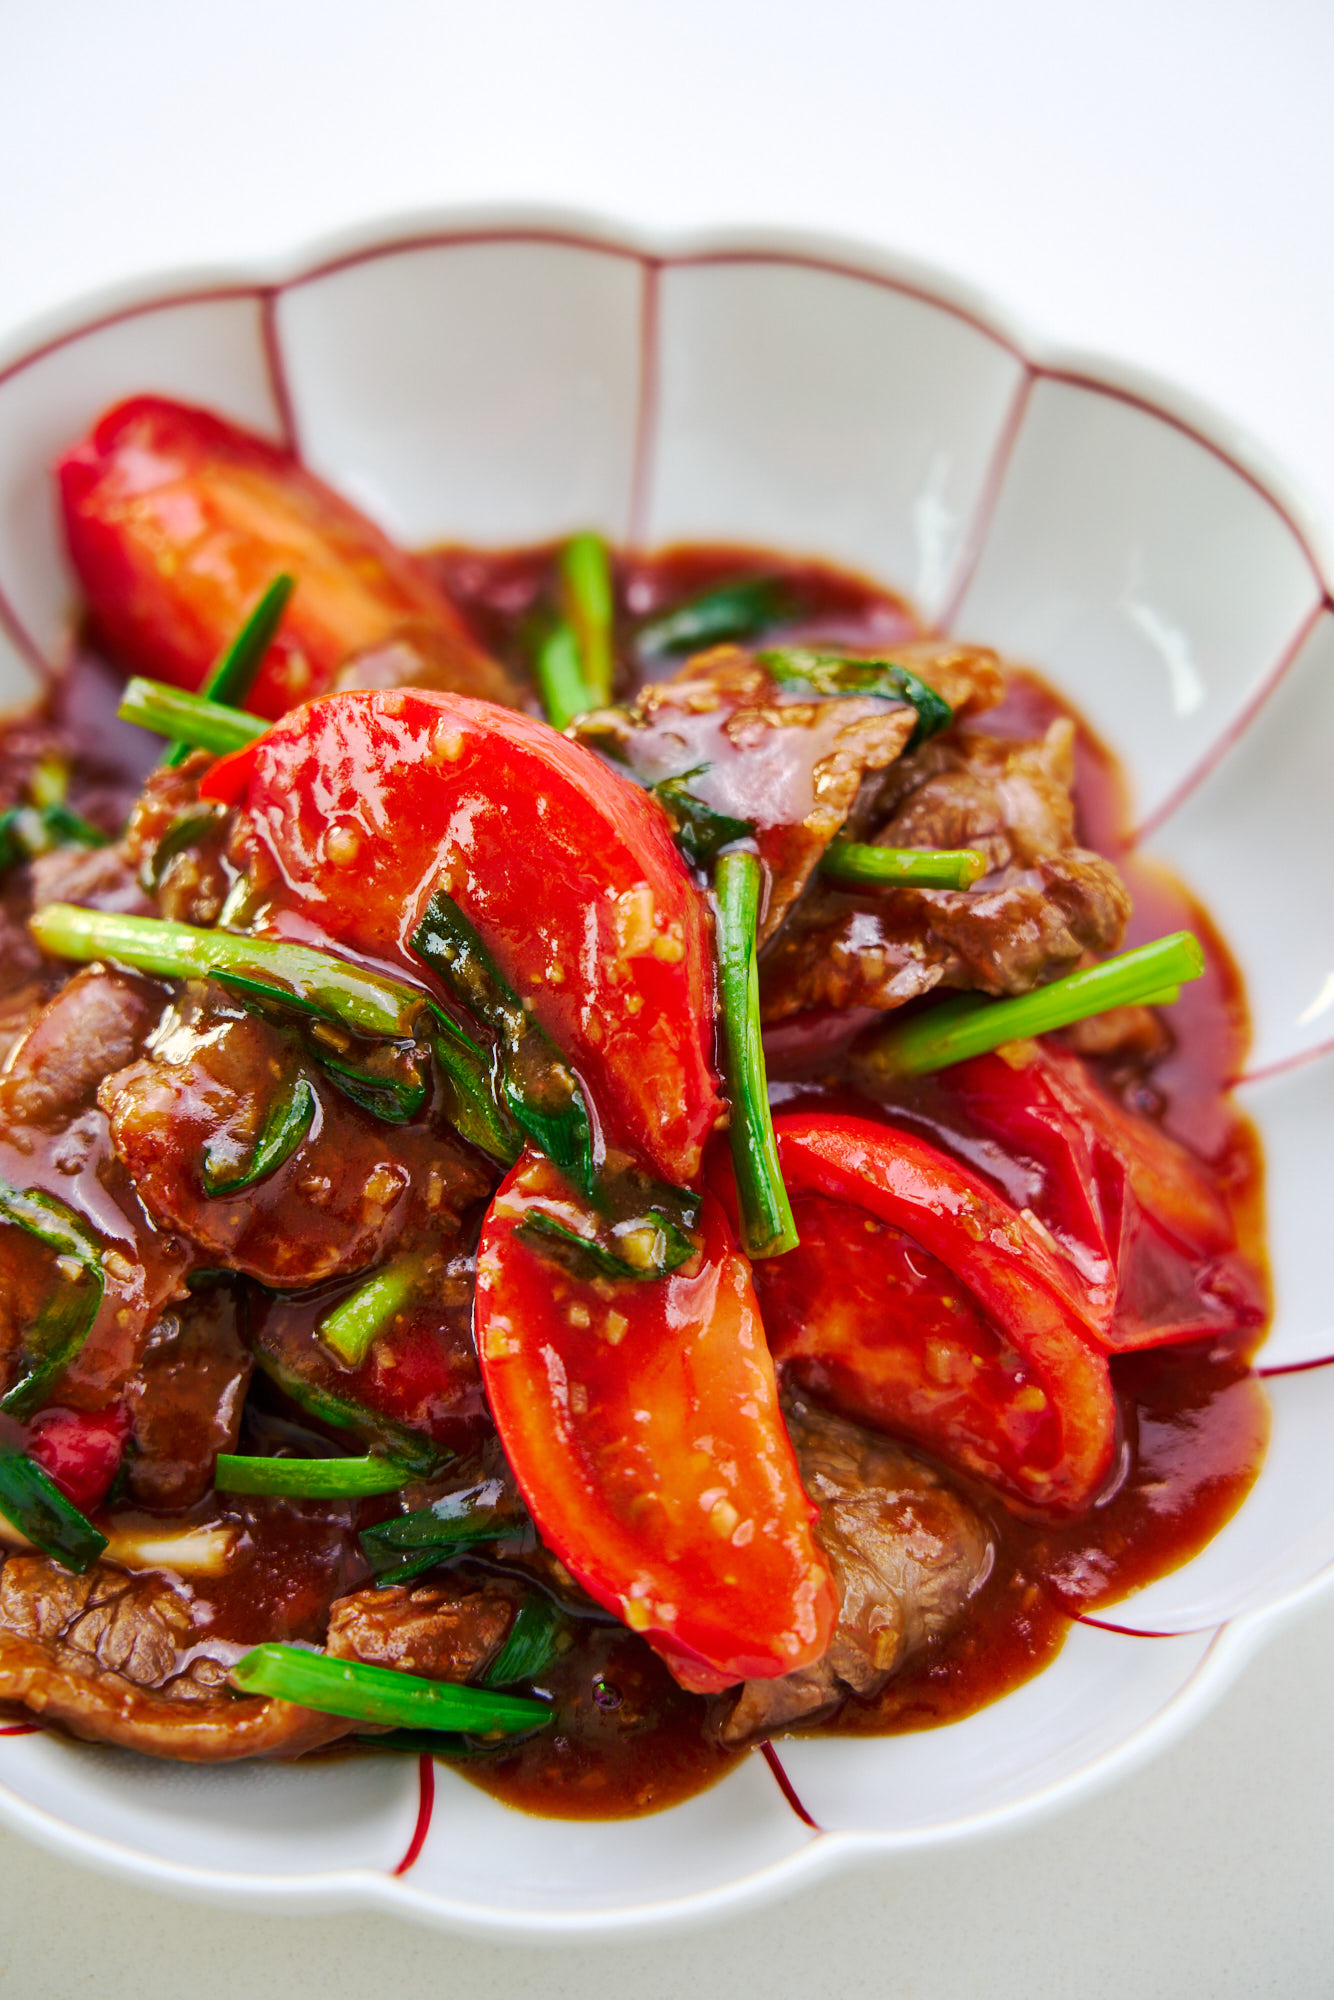 Stir-fried steak and tomatoes with scallions, garlic and ginger.